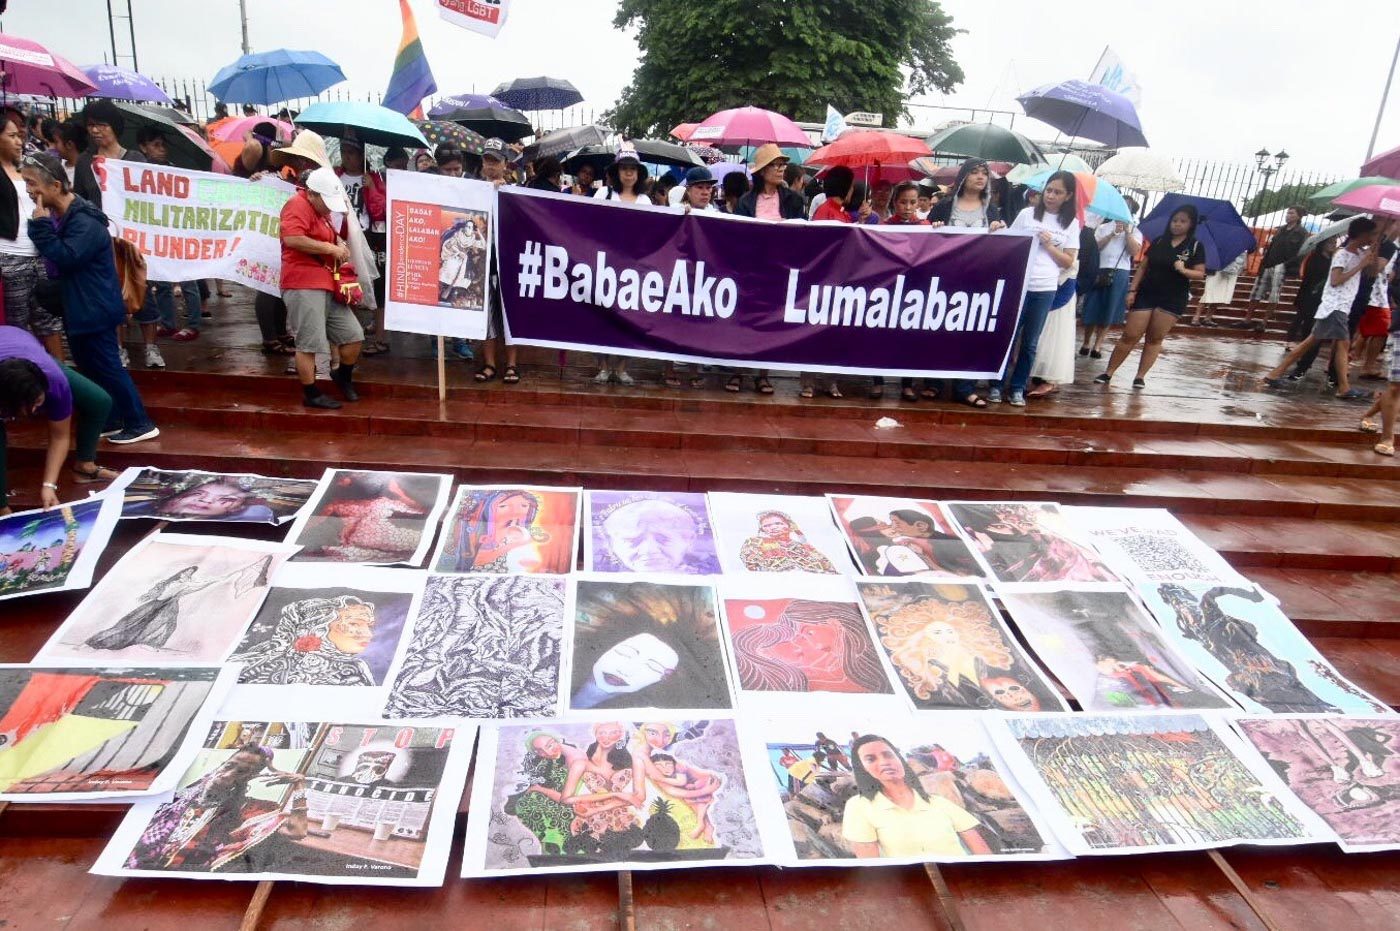 HINDIPENDENCE. The #BabaeAko march is part of the #HINDIpendence day protest activities organized by opposition groups against the Duterte administration. Photo by Angie de Silva/Rappler 